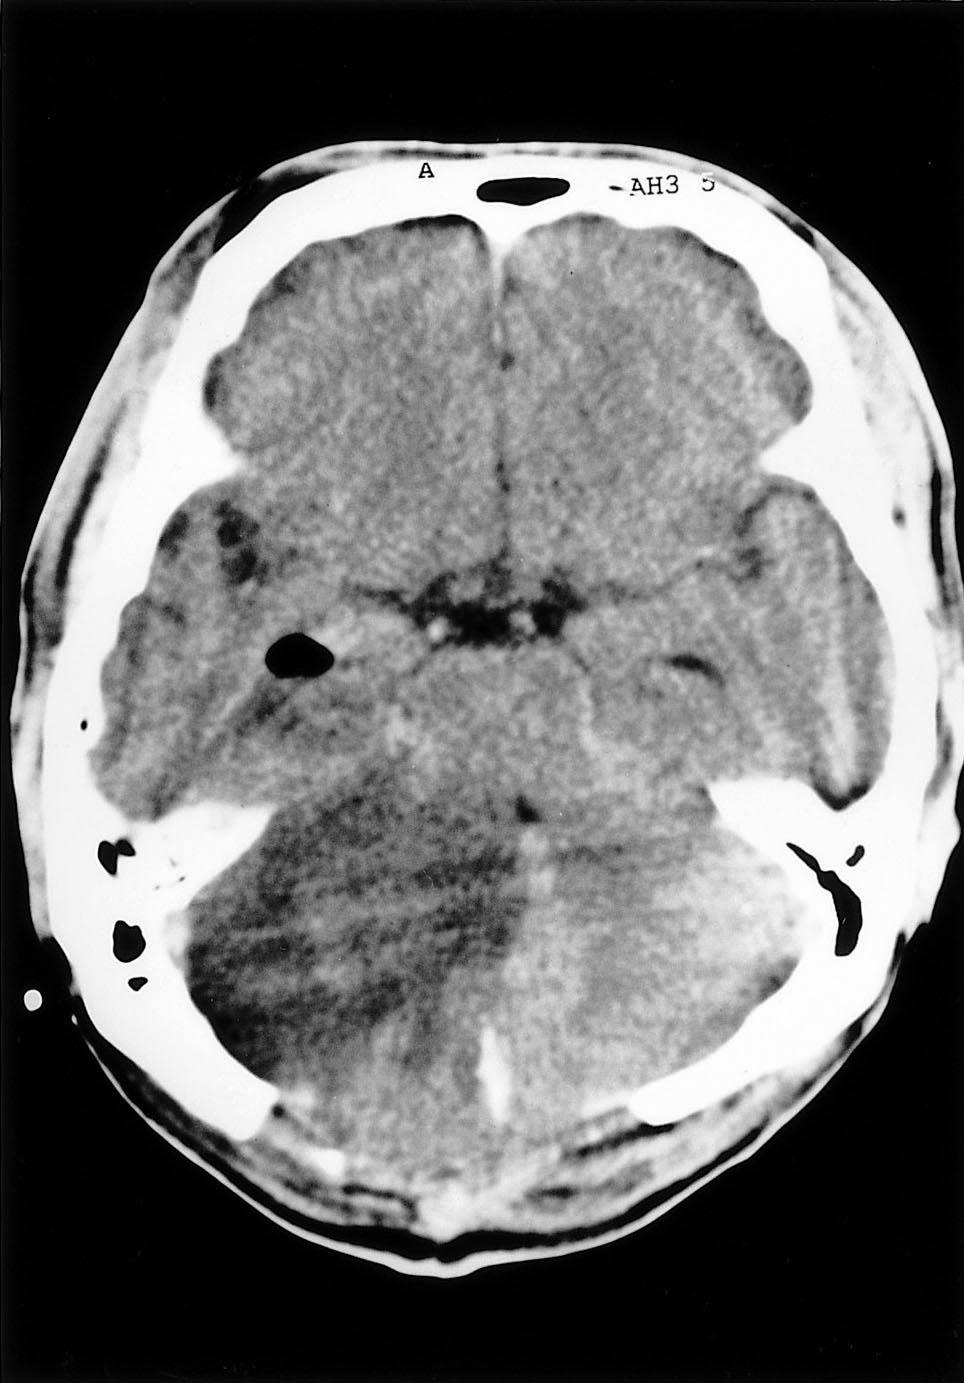 There is low density lesion in right cerebellar hemisphere with mass effect shifting midline to the left showing ischemic infarcion area. Figure 5.